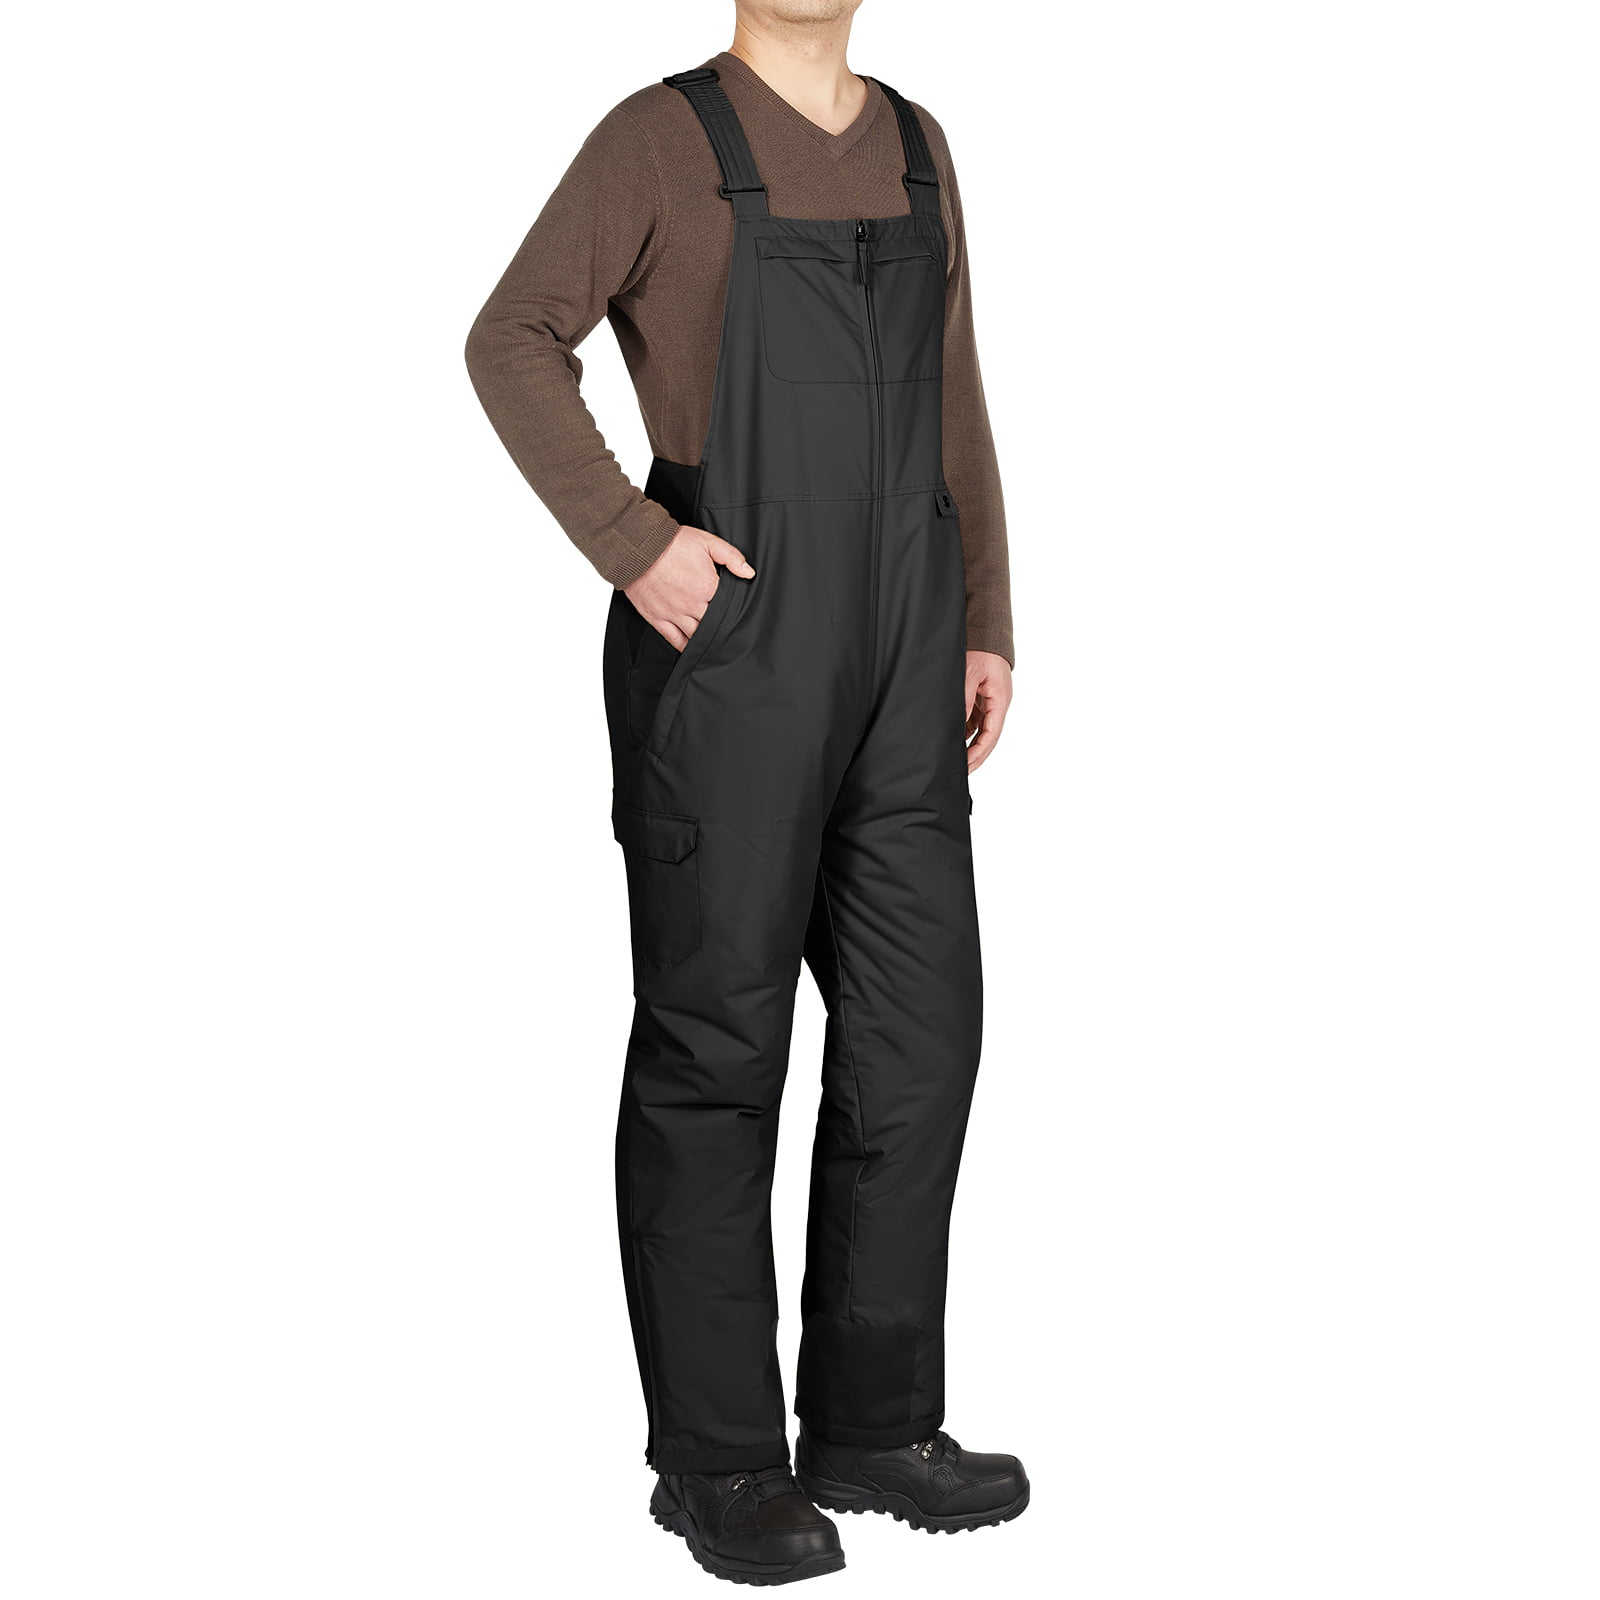 Snow Overalls for Men Essential Insulated Bib Overalls Waterproof Breathable Ski Pants